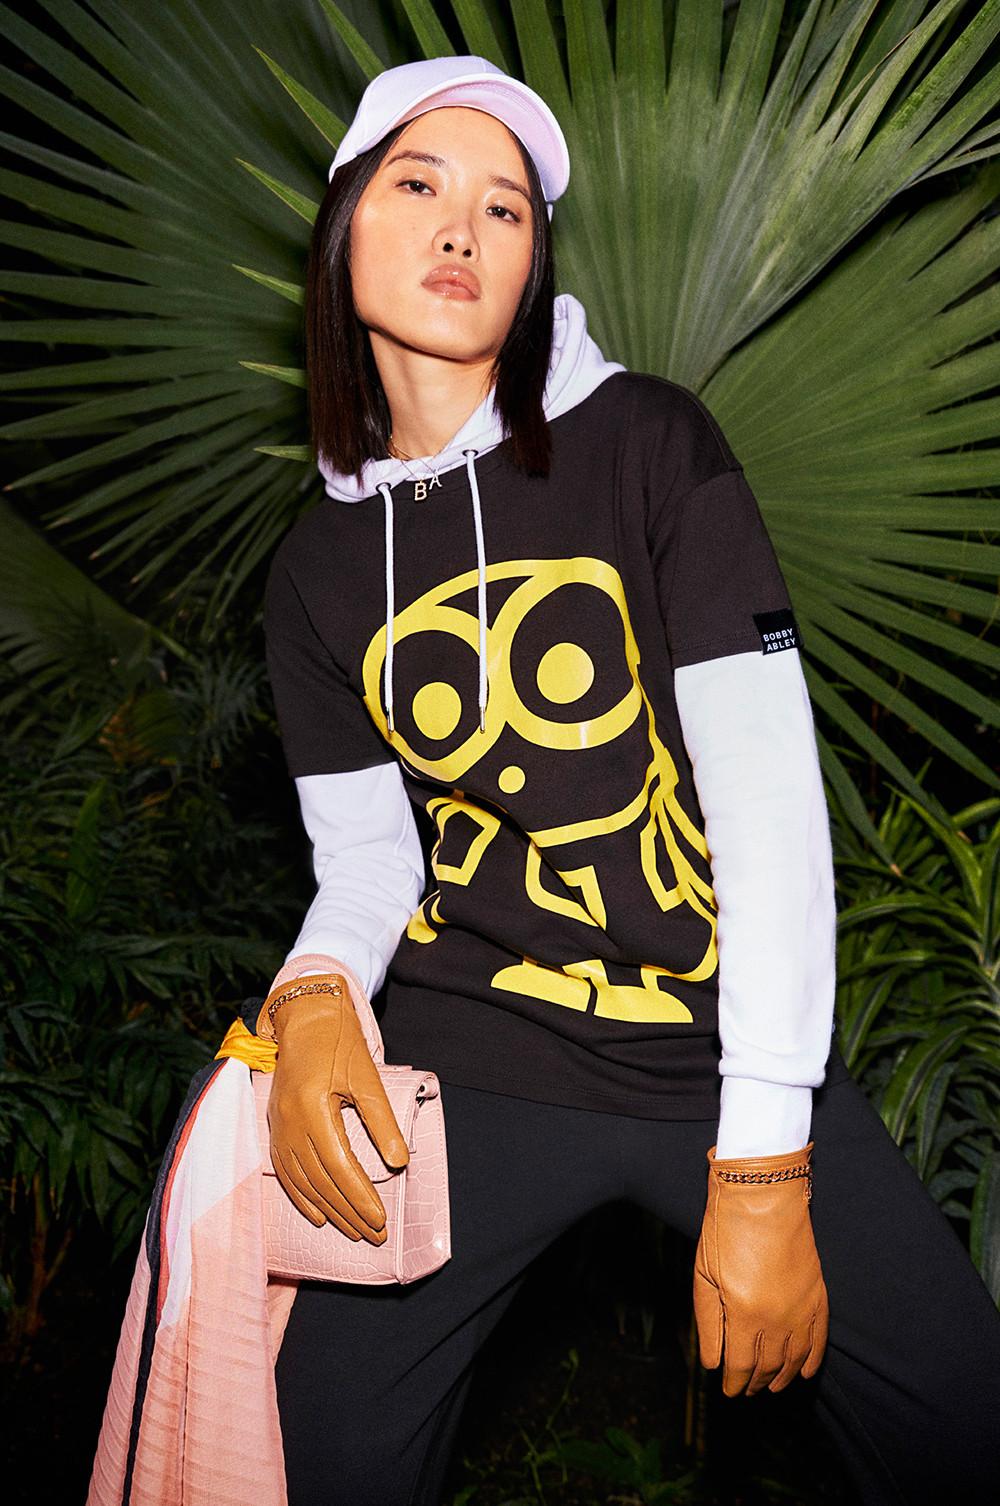 Image 9 bobby abley